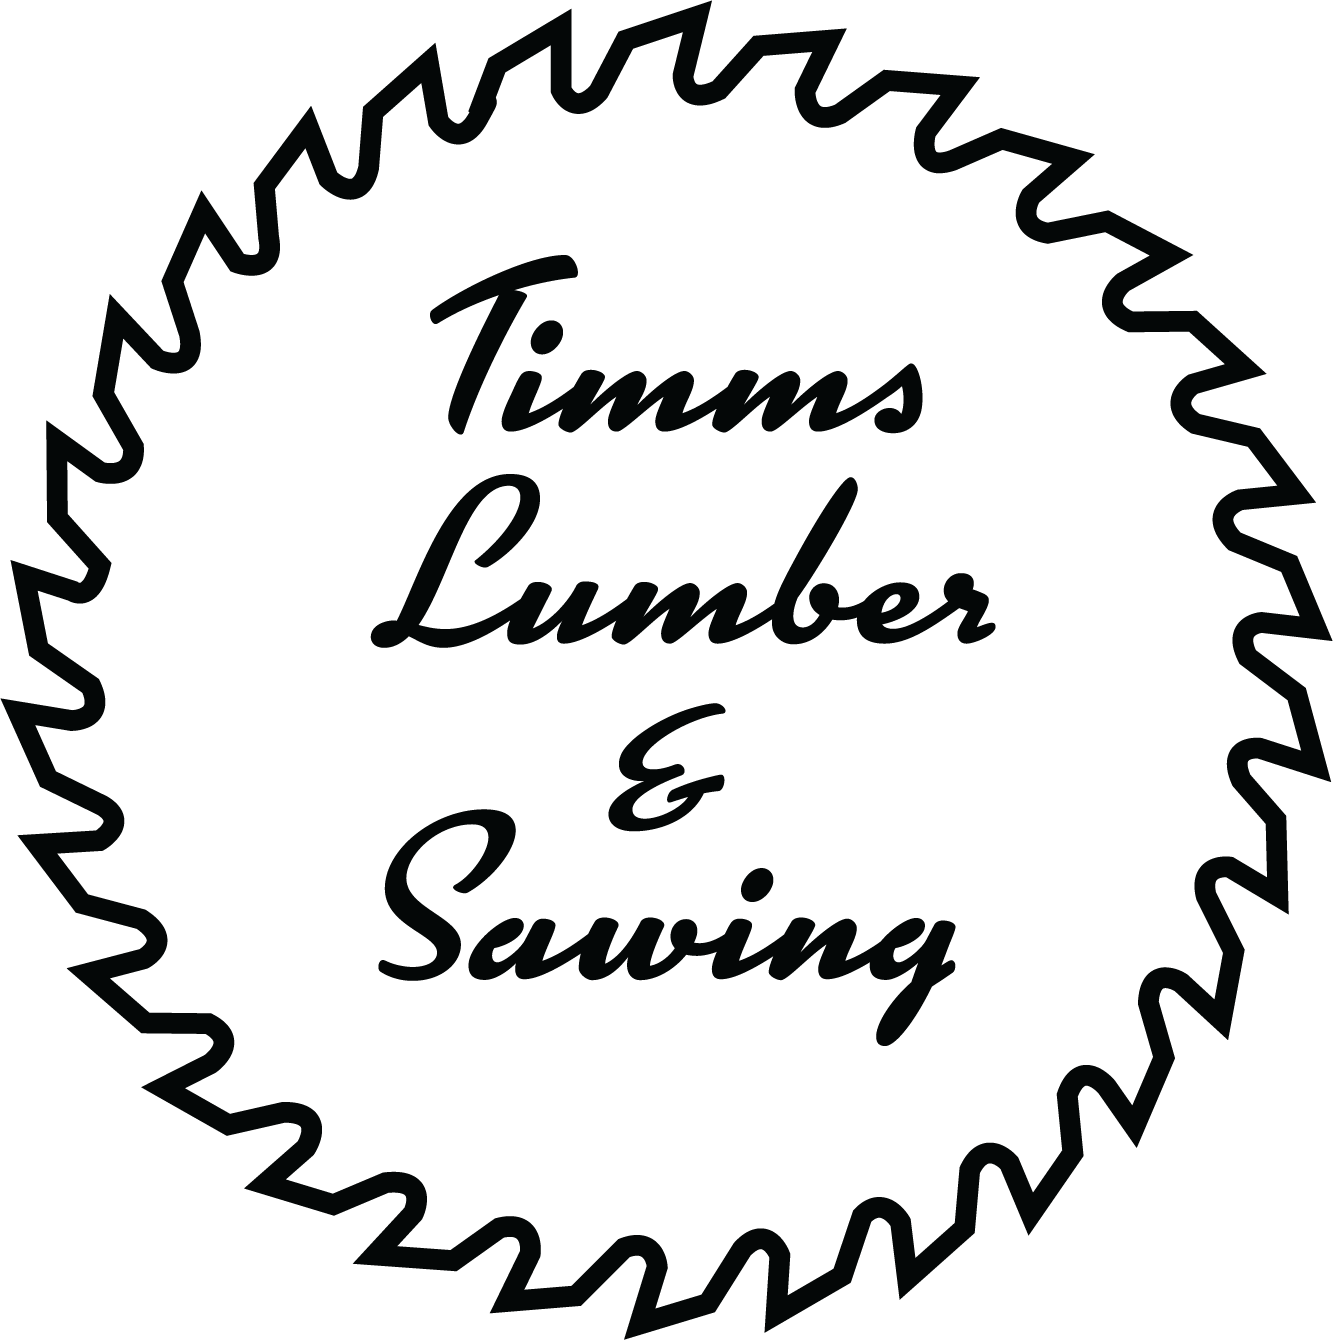 Timms Lumber and Sawing